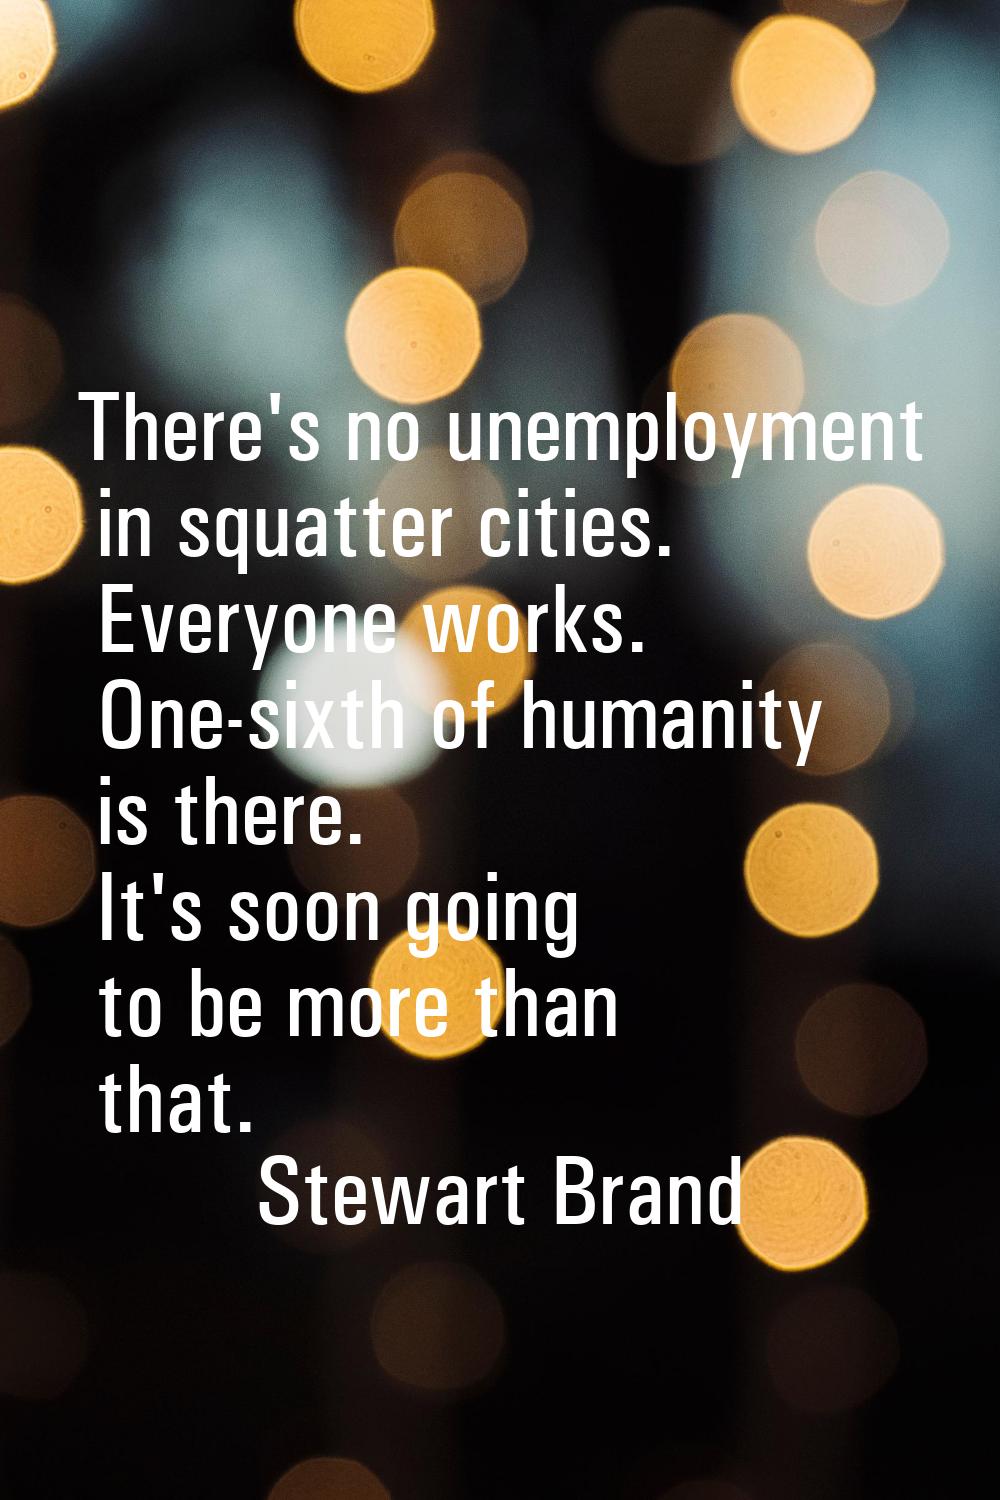 There's no unemployment in squatter cities. Everyone works. One-sixth of humanity is there. It's so